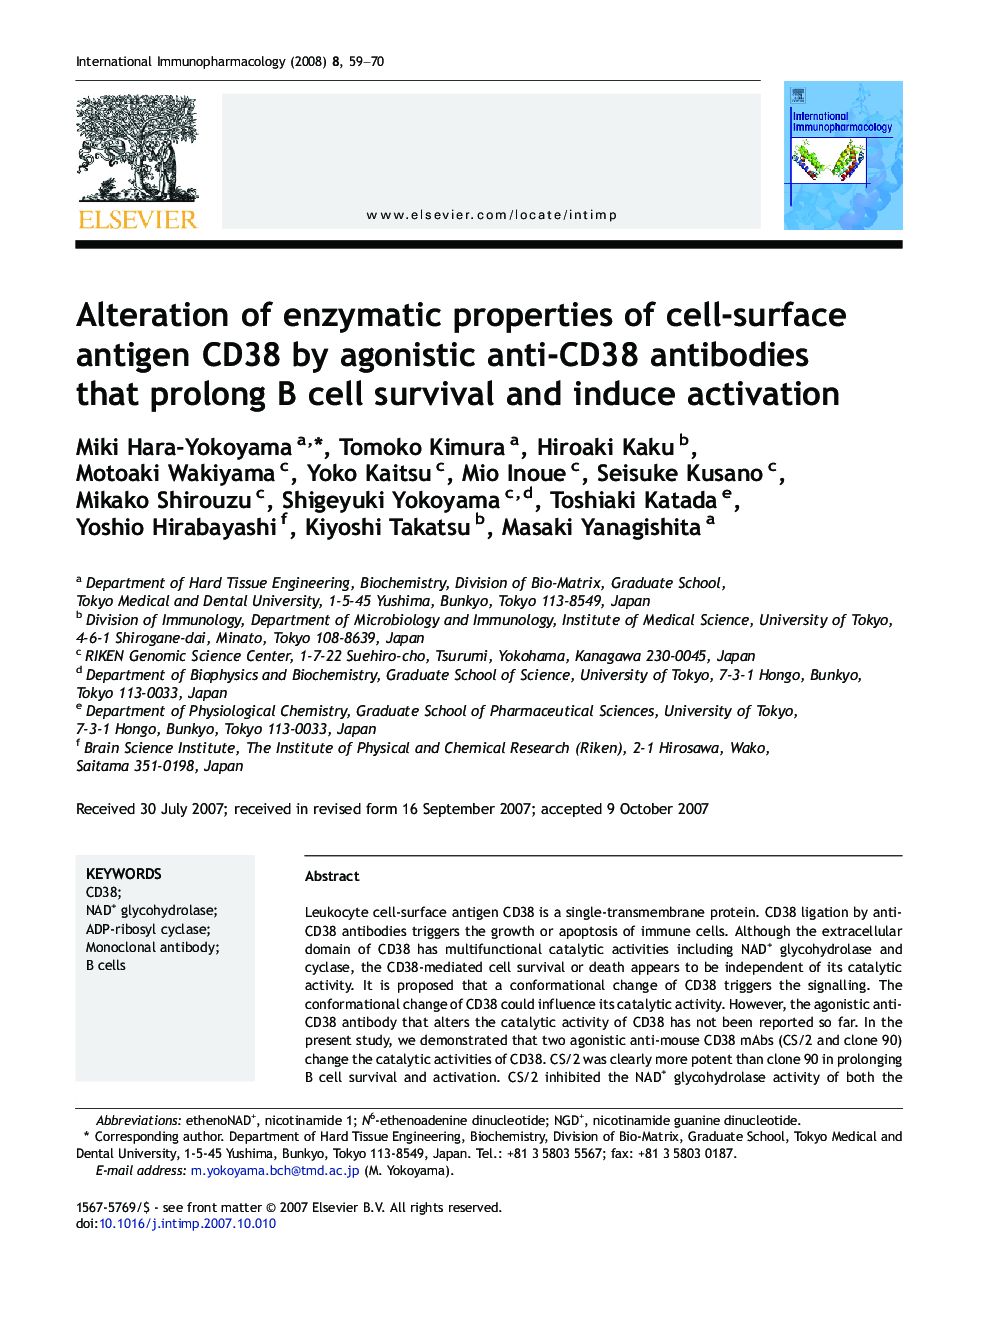 Alteration of enzymatic properties of cell-surface antigen CD38 by agonistic anti-CD38 antibodies that prolong B cell survival and induce activation